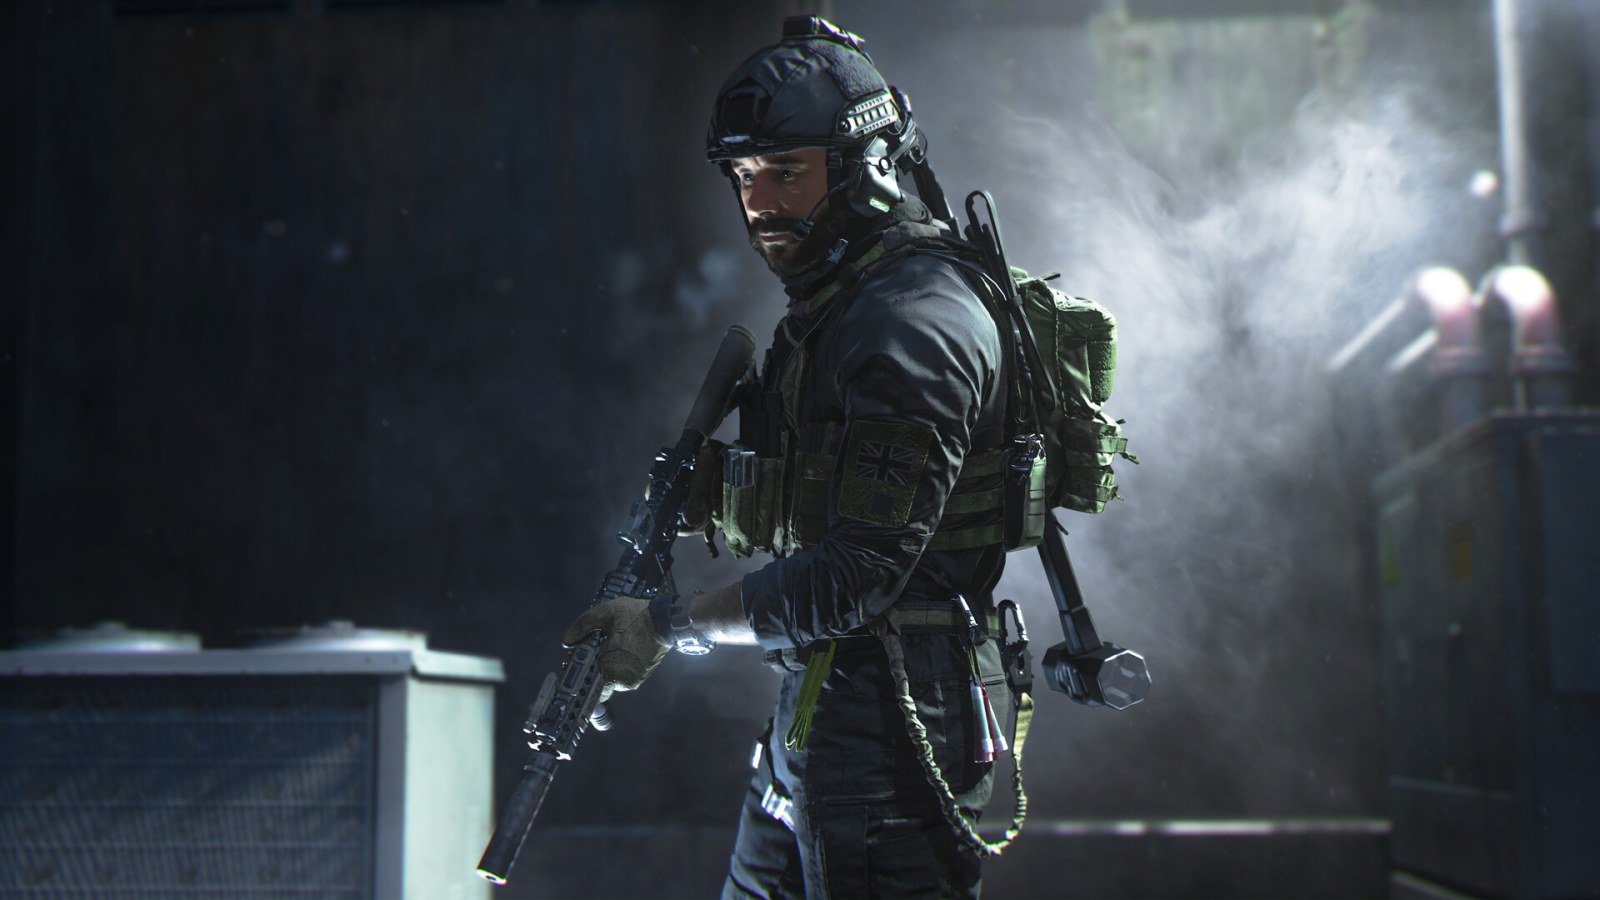 modern warfare: 'Call of Duty: Modern Warfare 2': Here's duration of  campaign, missions list - The Economic Times